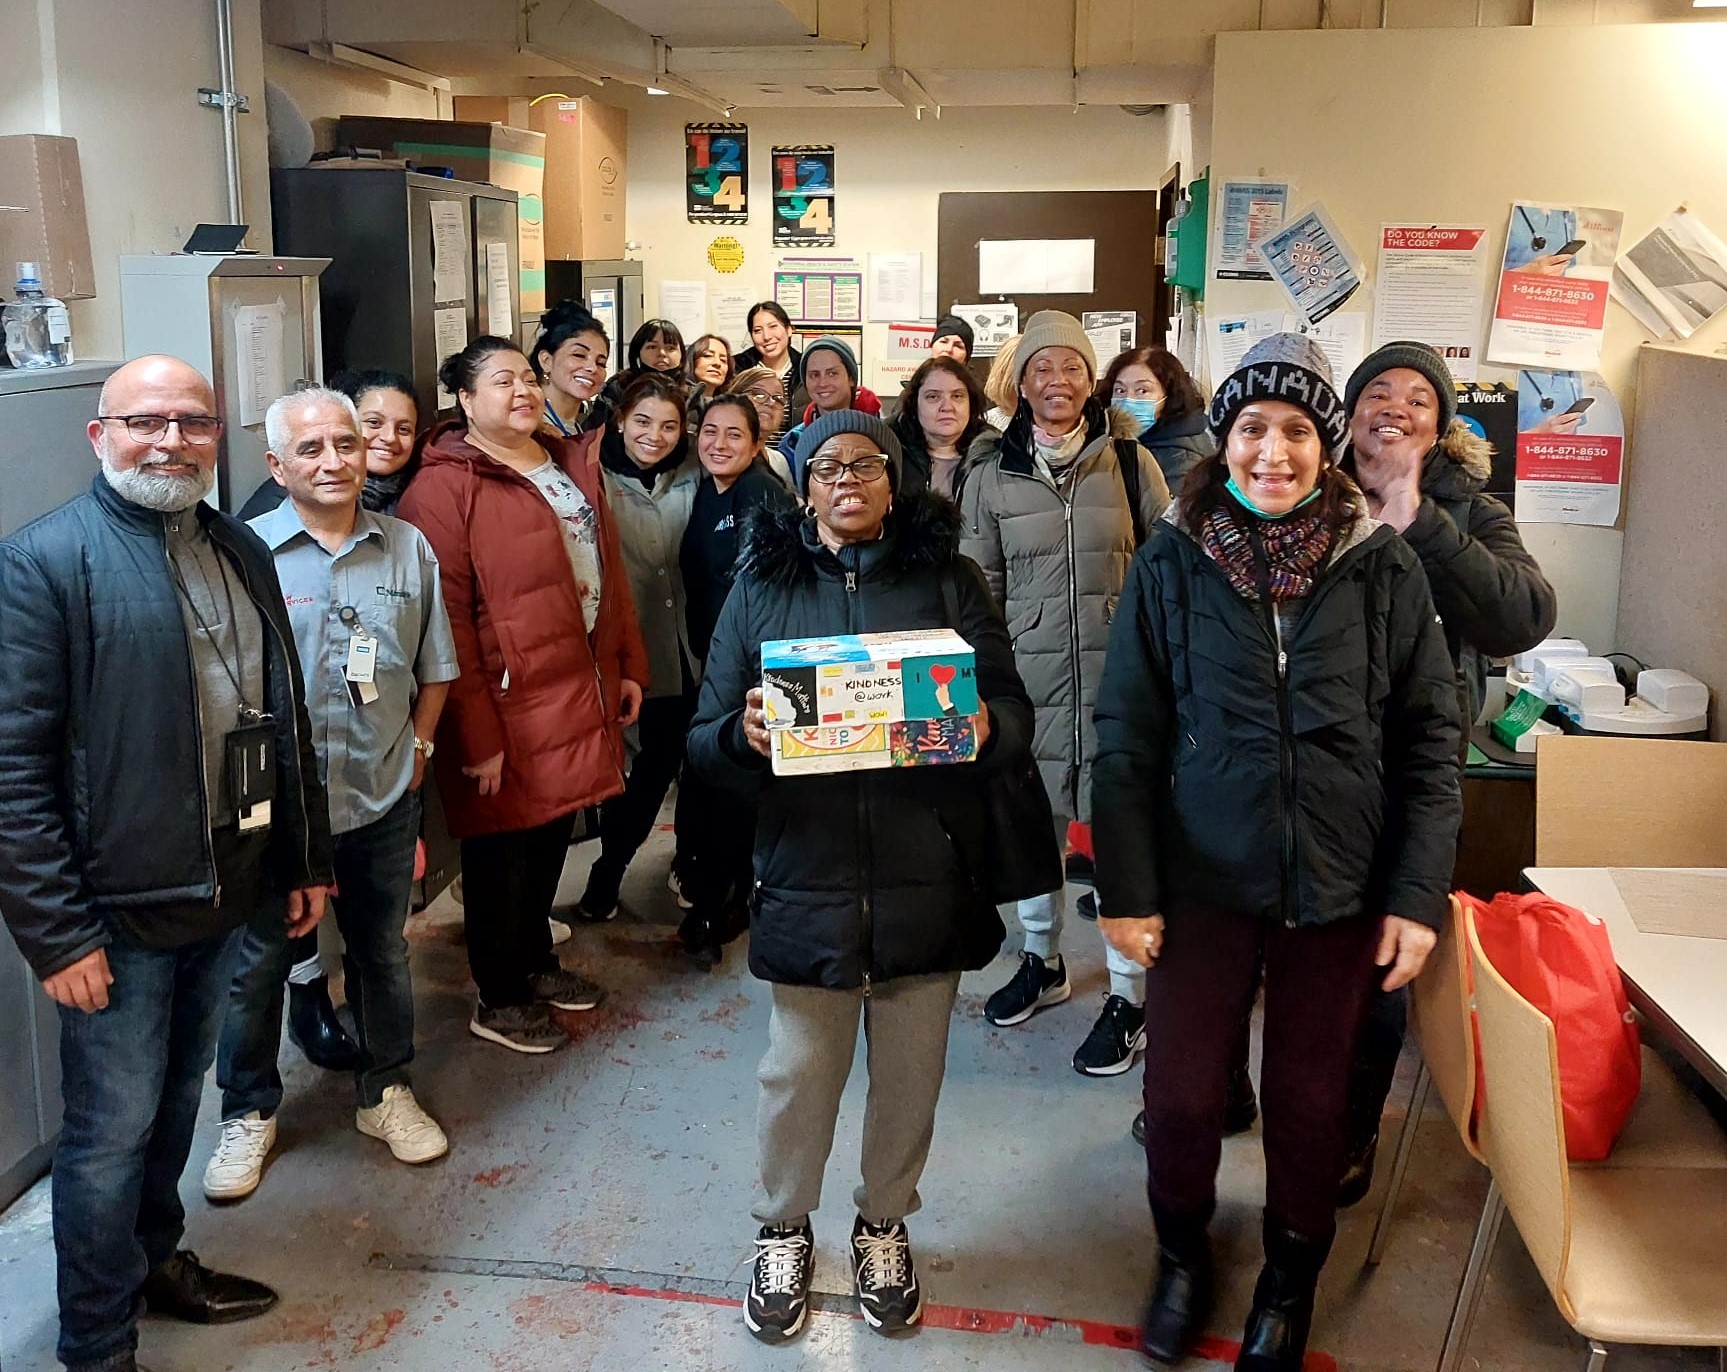 A diverse group of people smiling in a break room, one person holding a box of crayons, posing for a group photo.